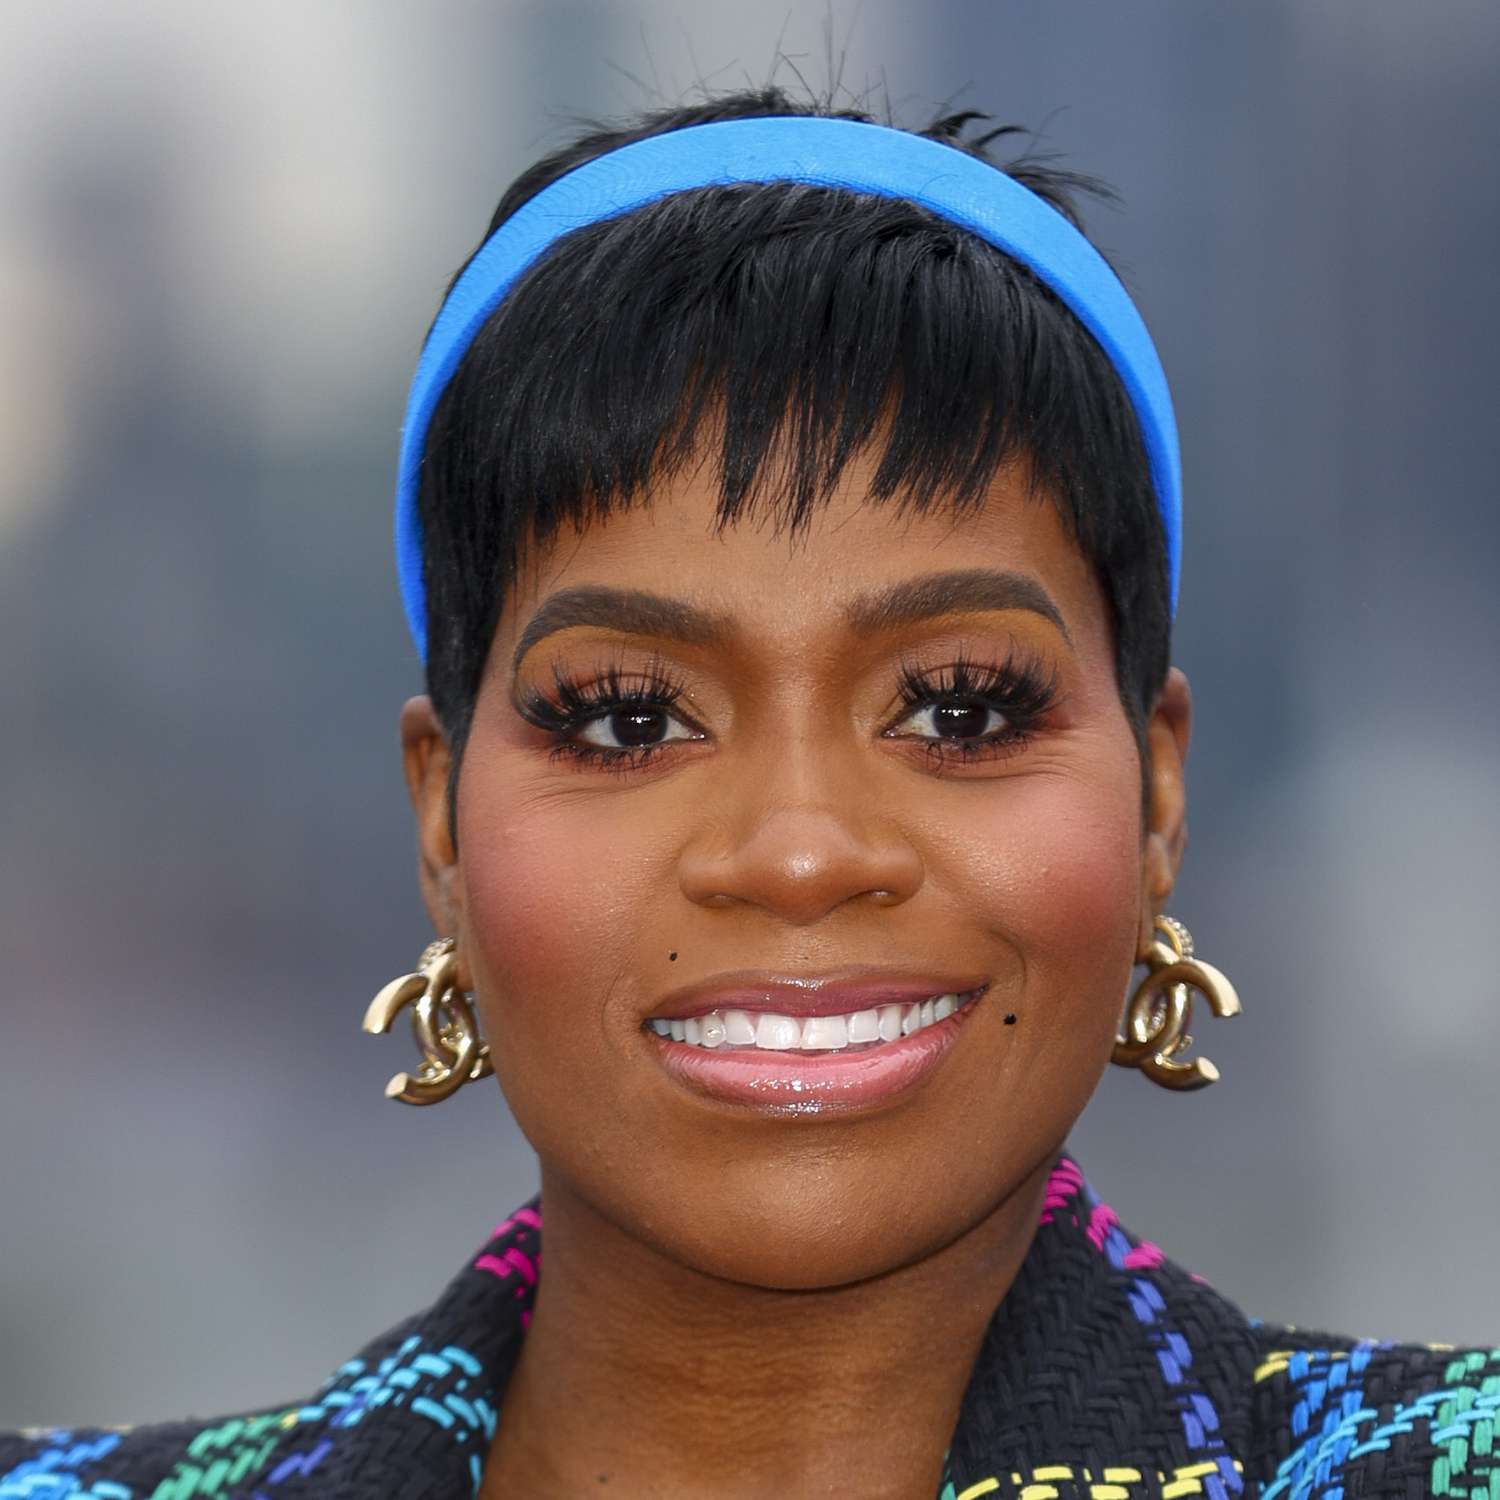 Fantasia attends a film premiere in London wearing a choppy fringed pixie adorned with a bright blue headband